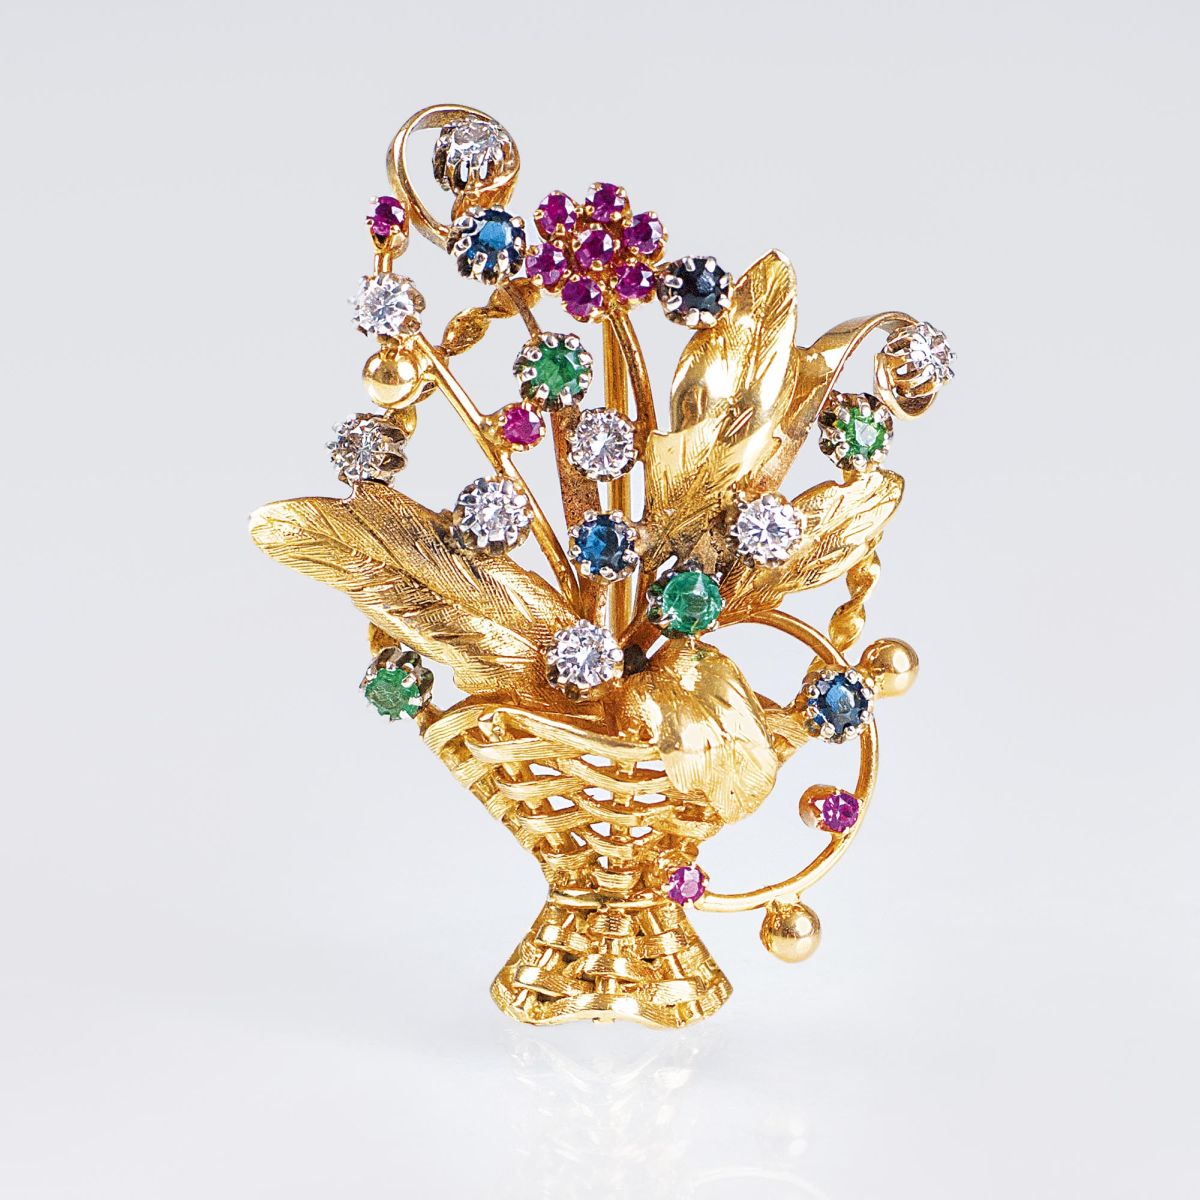 A Vintage Flower Brooch with Diamonds